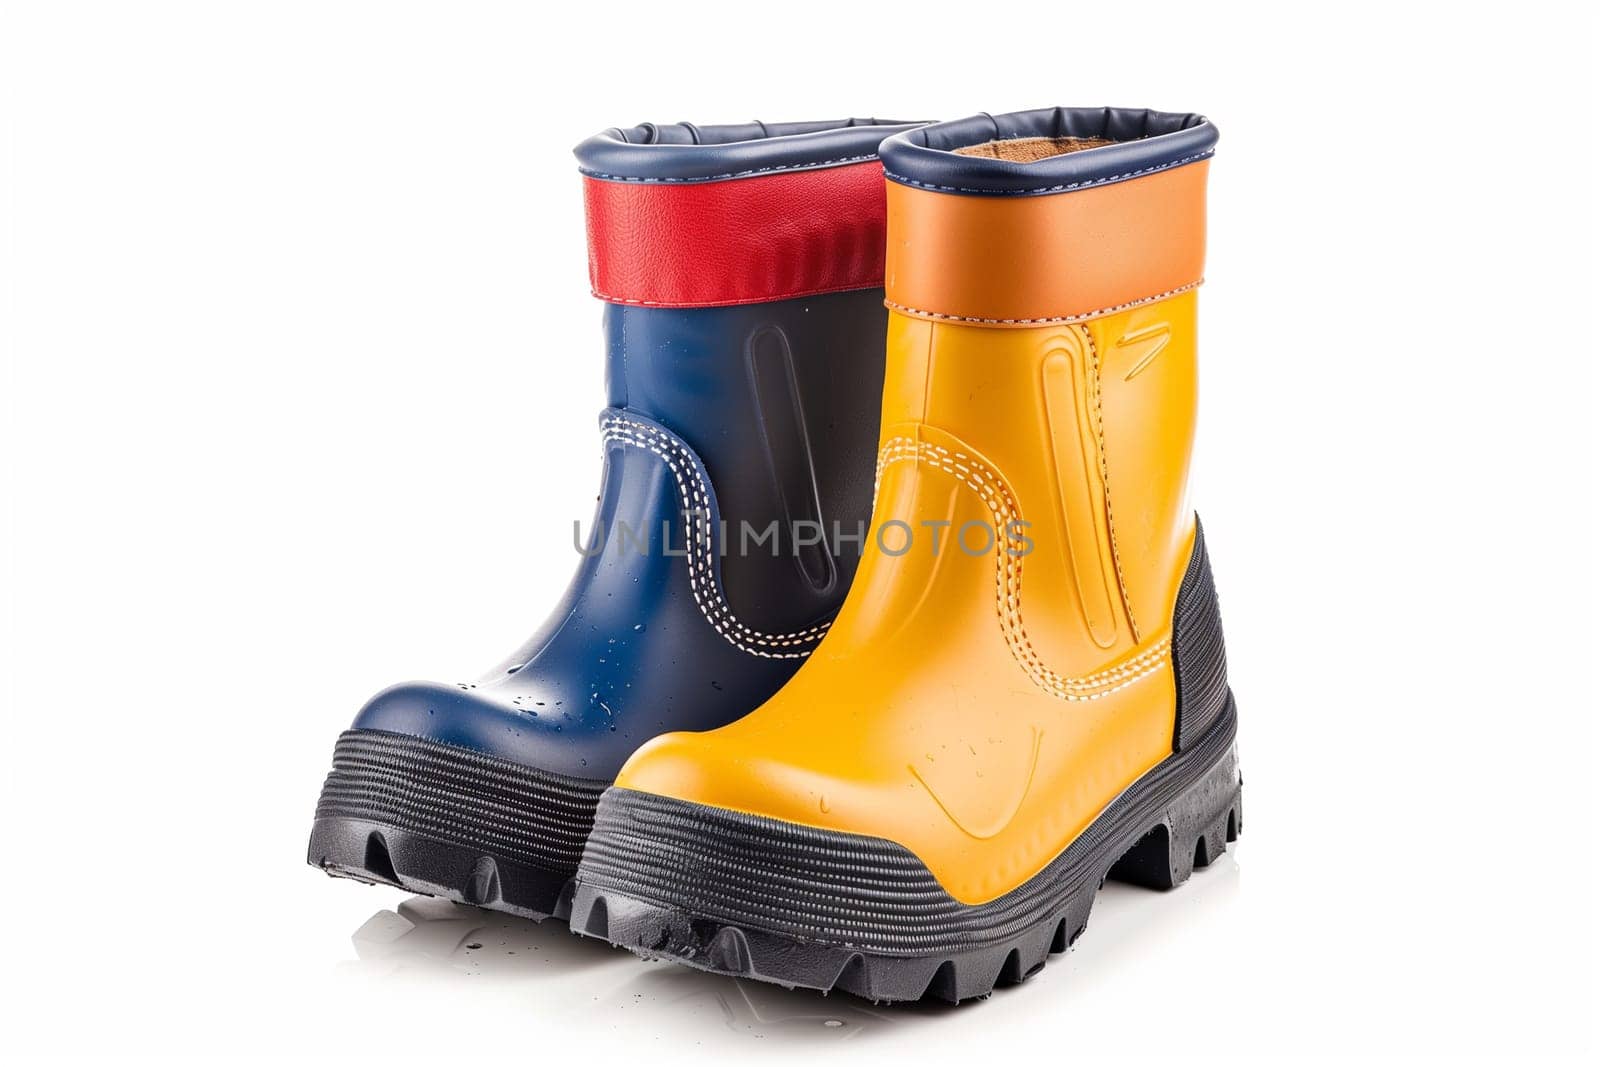 Childrens Rain Boots on White Background by Sd28DimoN_1976